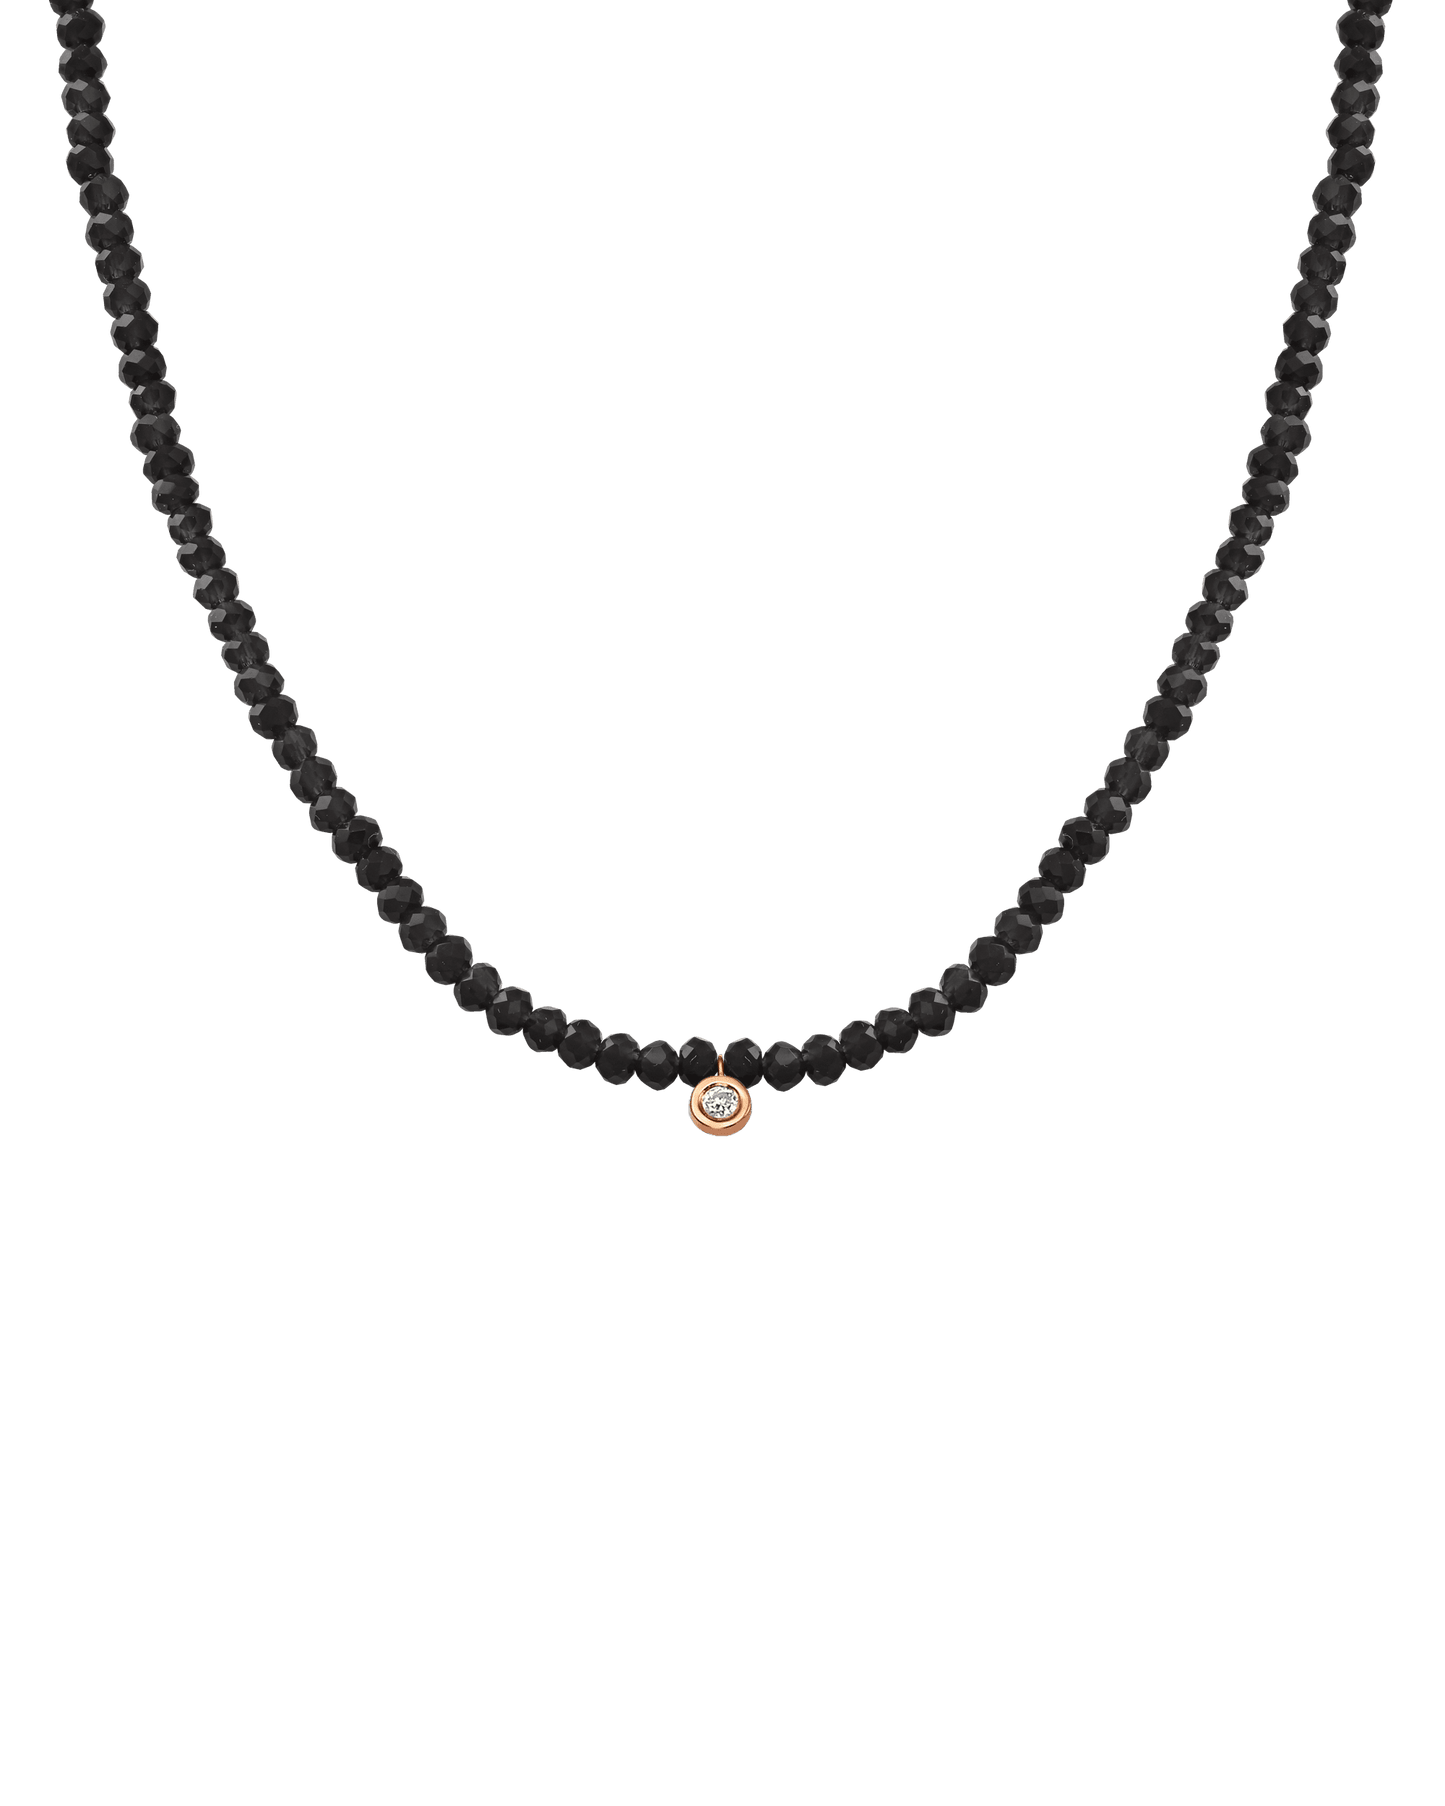 The Gemstone & Diamond Necklace - 14K Rose Gold Necklaces 14K Solid Gold Glass Beads Black Spinnel Small: 0.03ct 14"